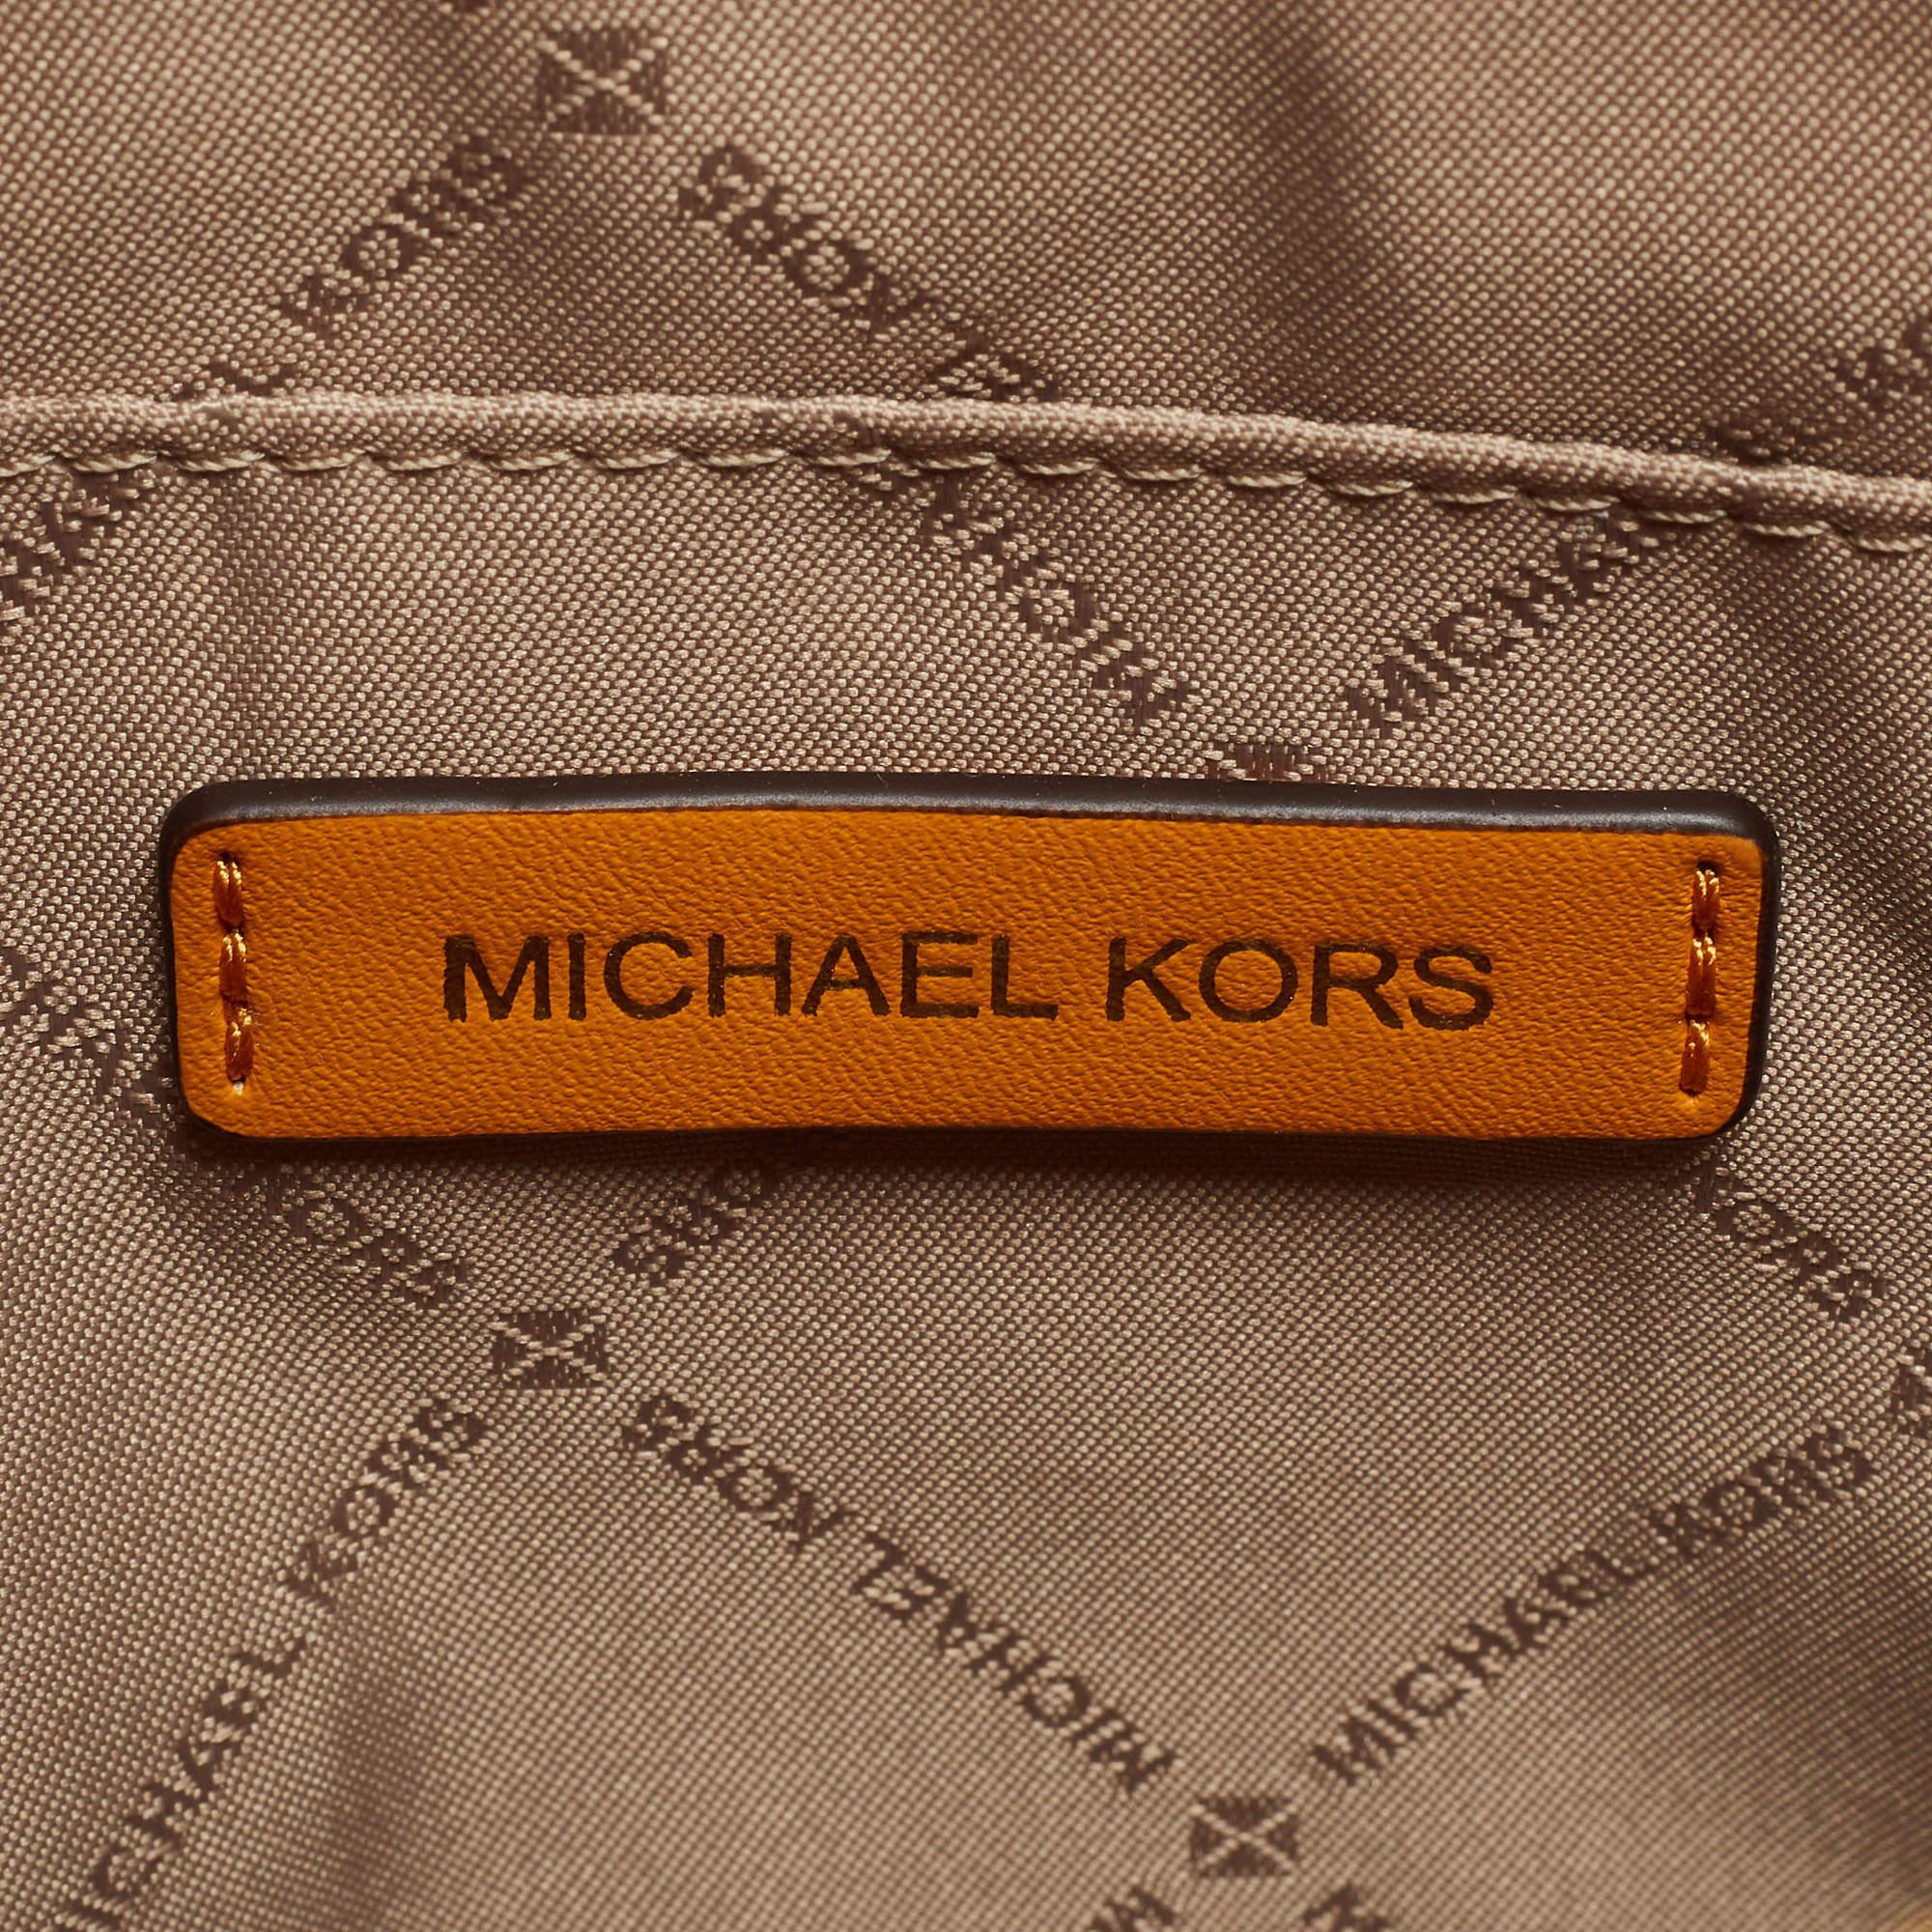 Michael Kors Mustard Signature Leather and Suede Small Avril Satchel In New Condition For Sale In Dubai, Al Qouz 2